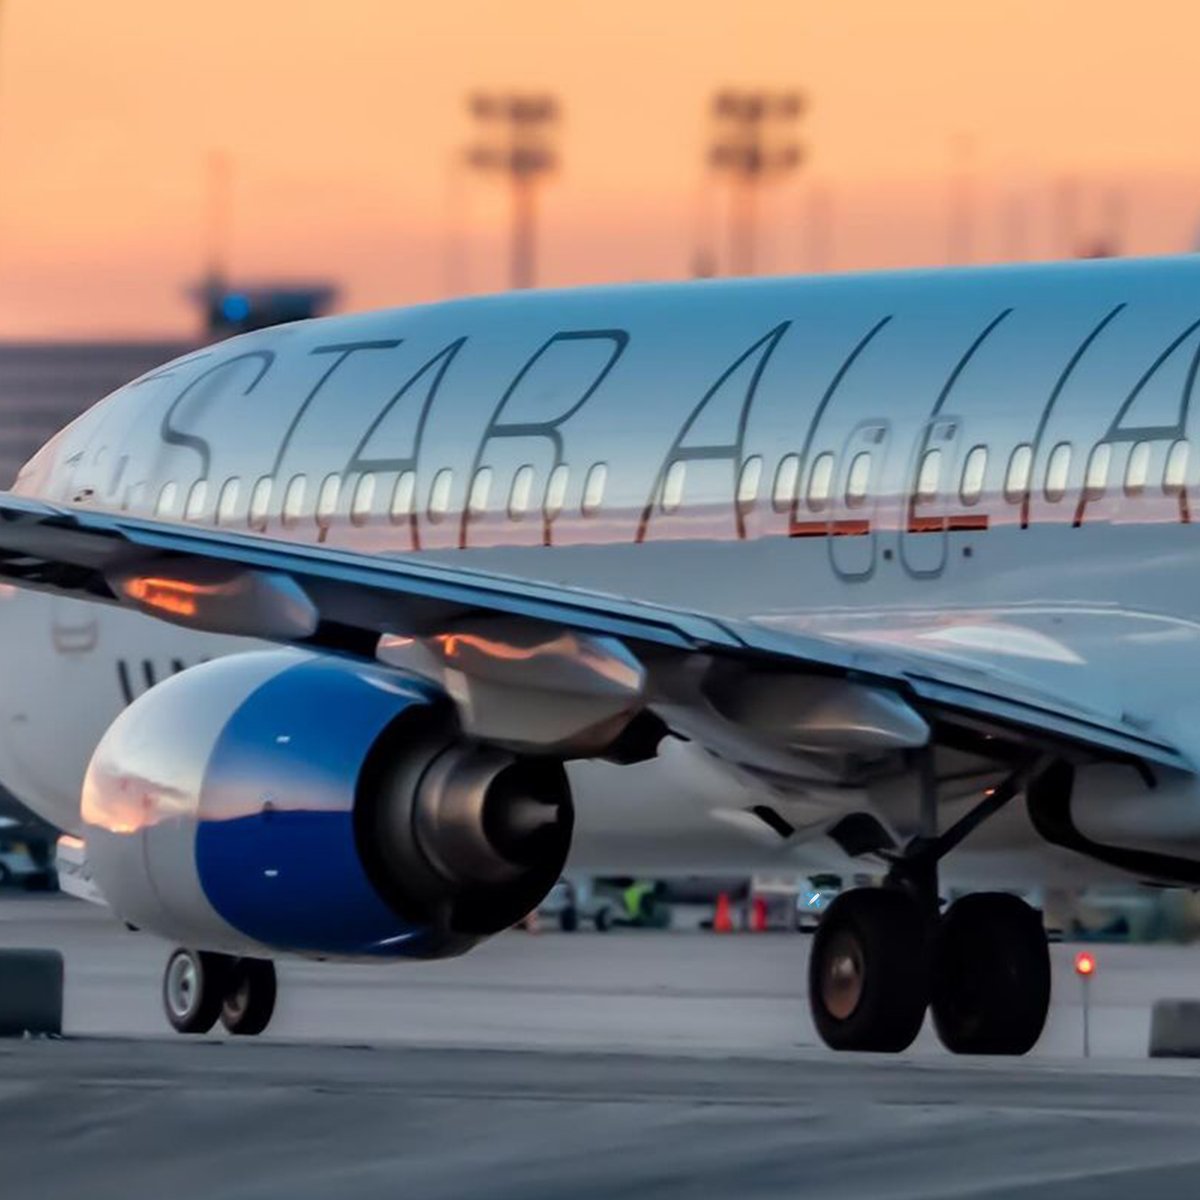 Strutting the runway with style ✨ Can you spot the hidden emojis in these pre-take off photos? Round of applause to IG: united__elite for capturing @united moments before departure 👏